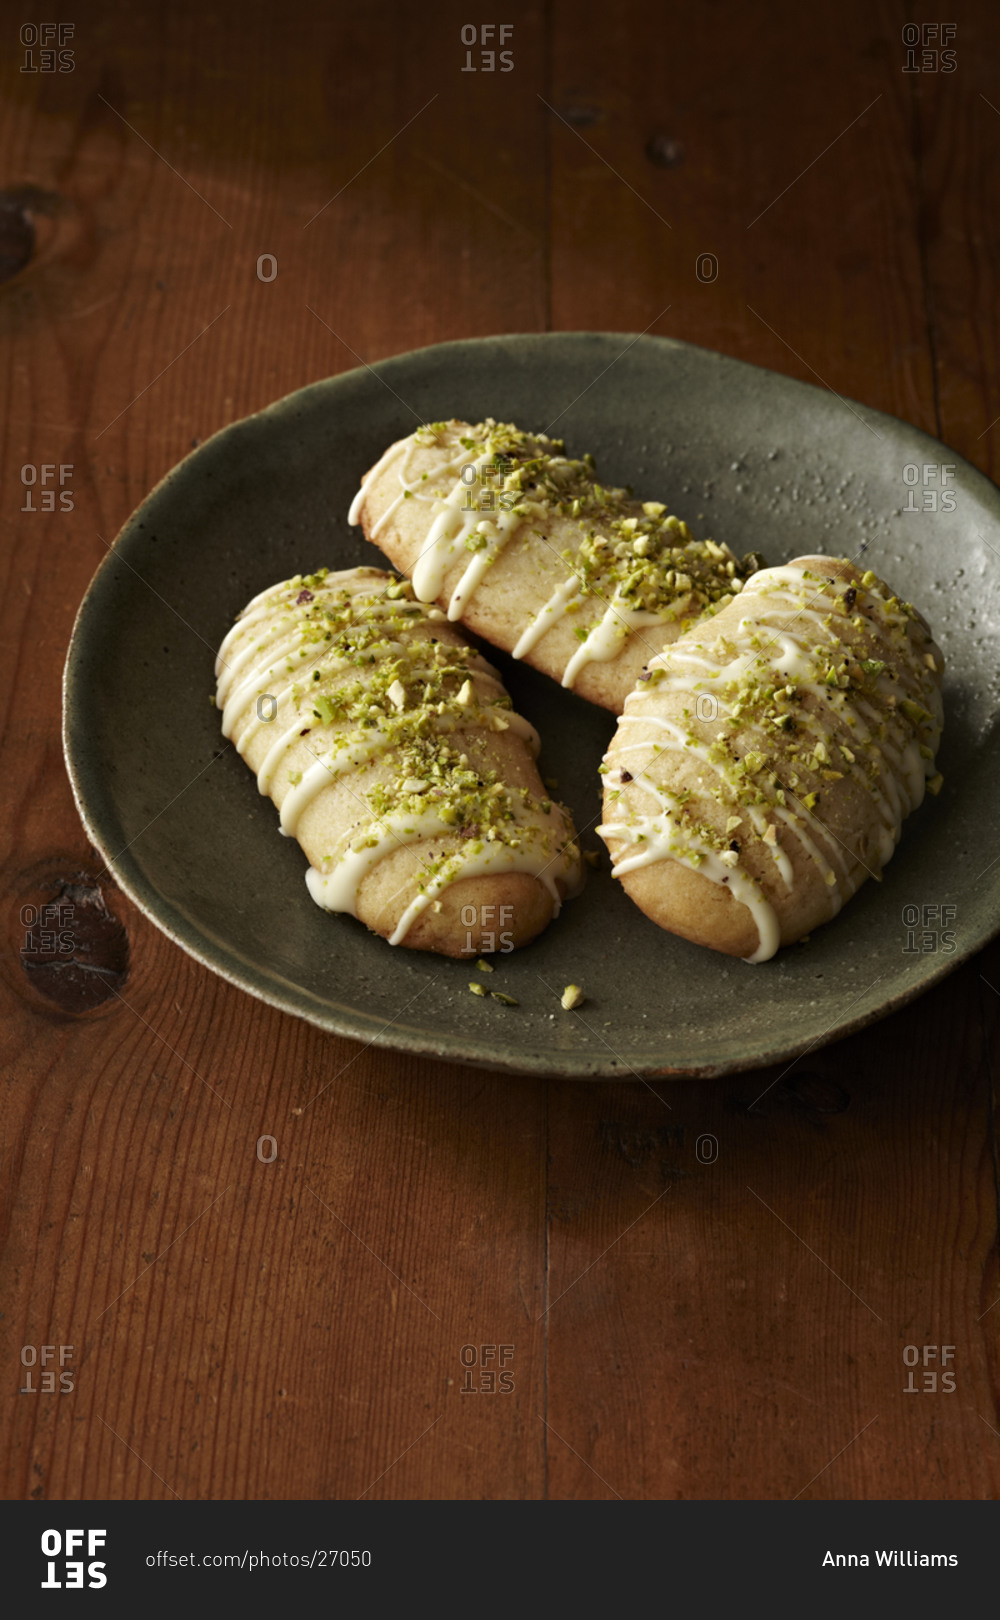 Lemon cookies topped with melted white chocolate and crushed pistachio nuts